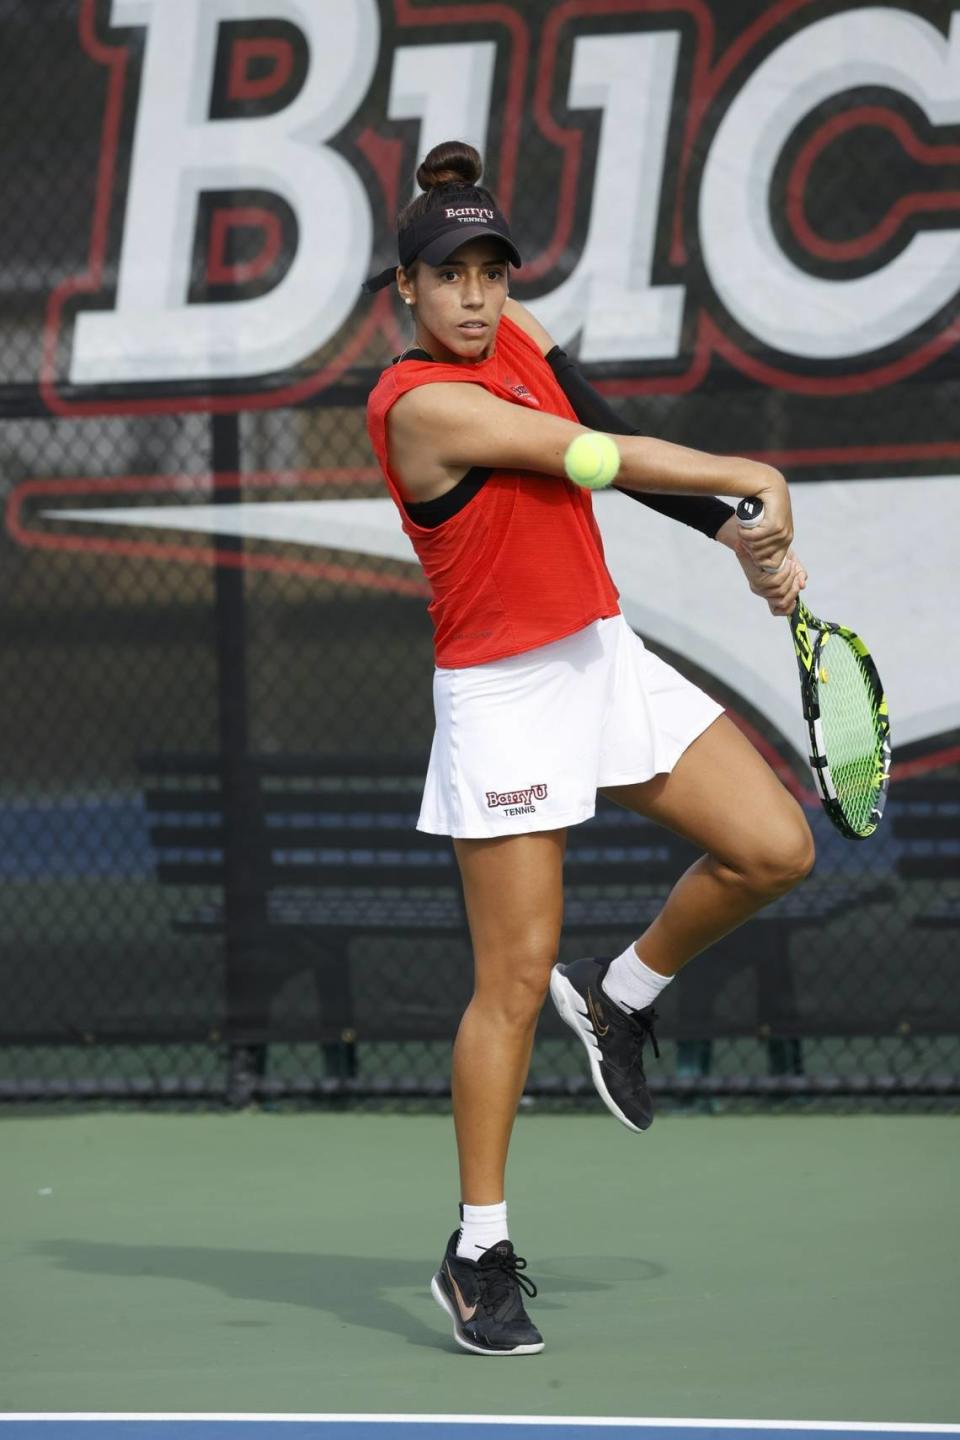 Barry University women’s tennis player Daniel Farfan, the Bucs’ No. 3 singles player, was integral part of their unbeaten season and run to a national championship. Courtesy of Barry University